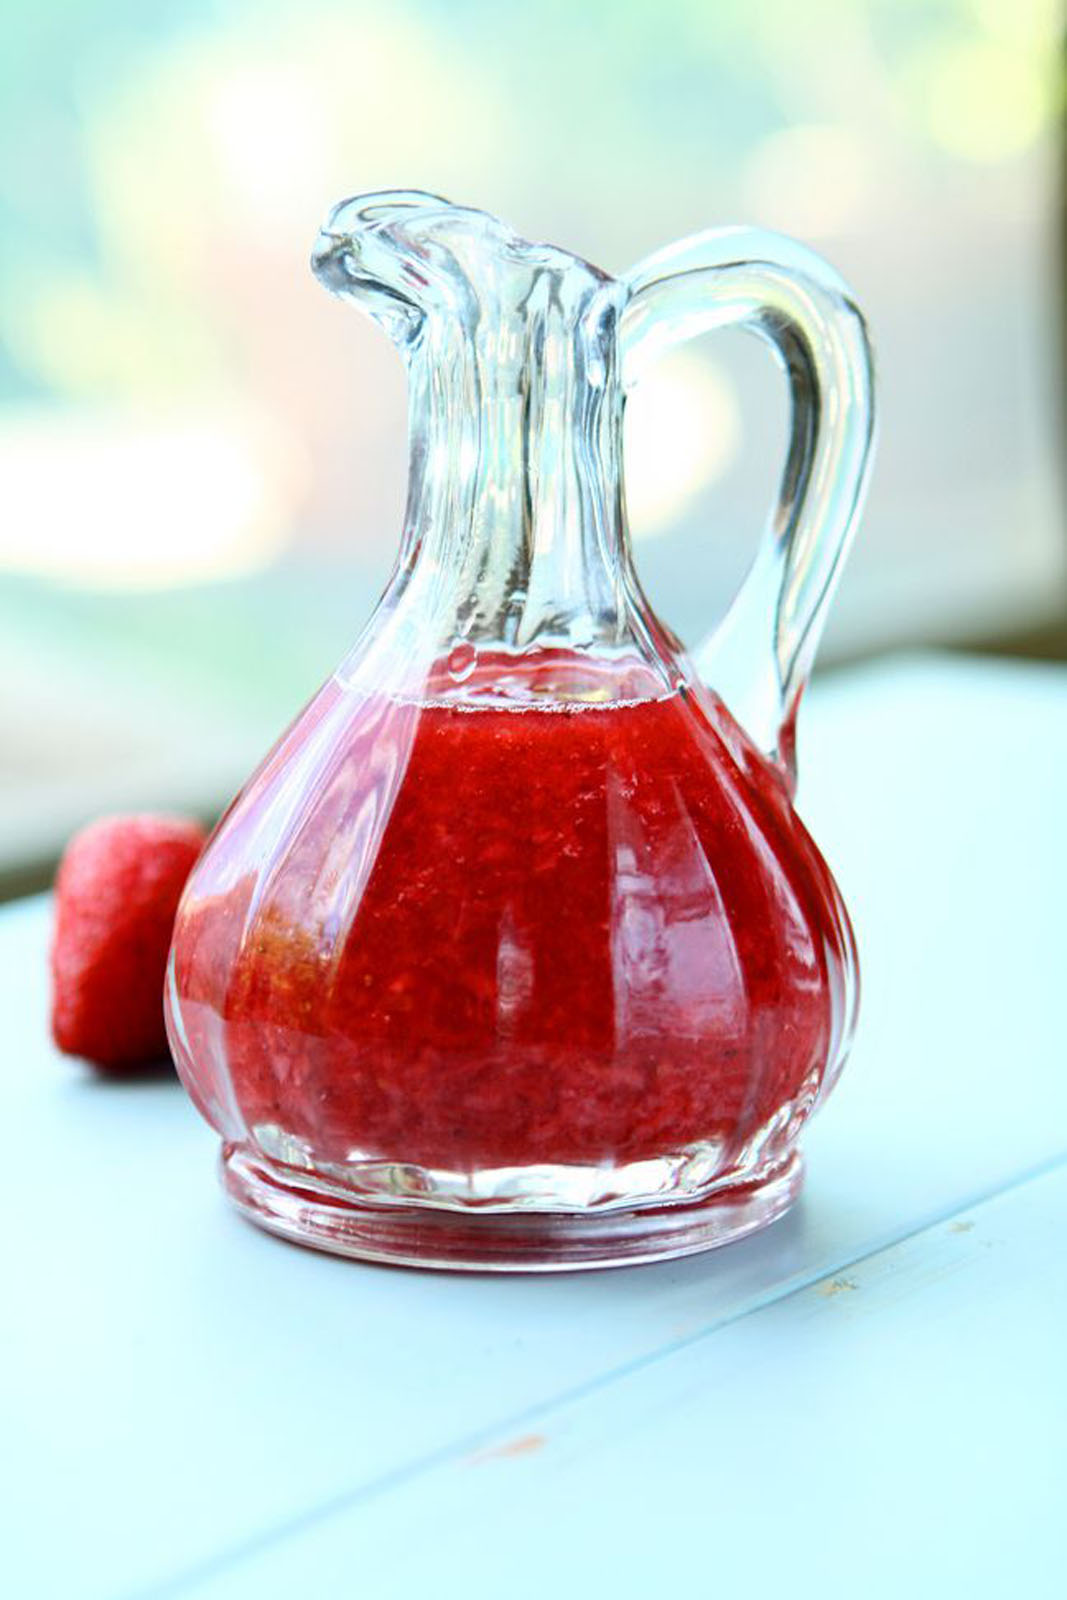 Strawberry compote in a glass carafe